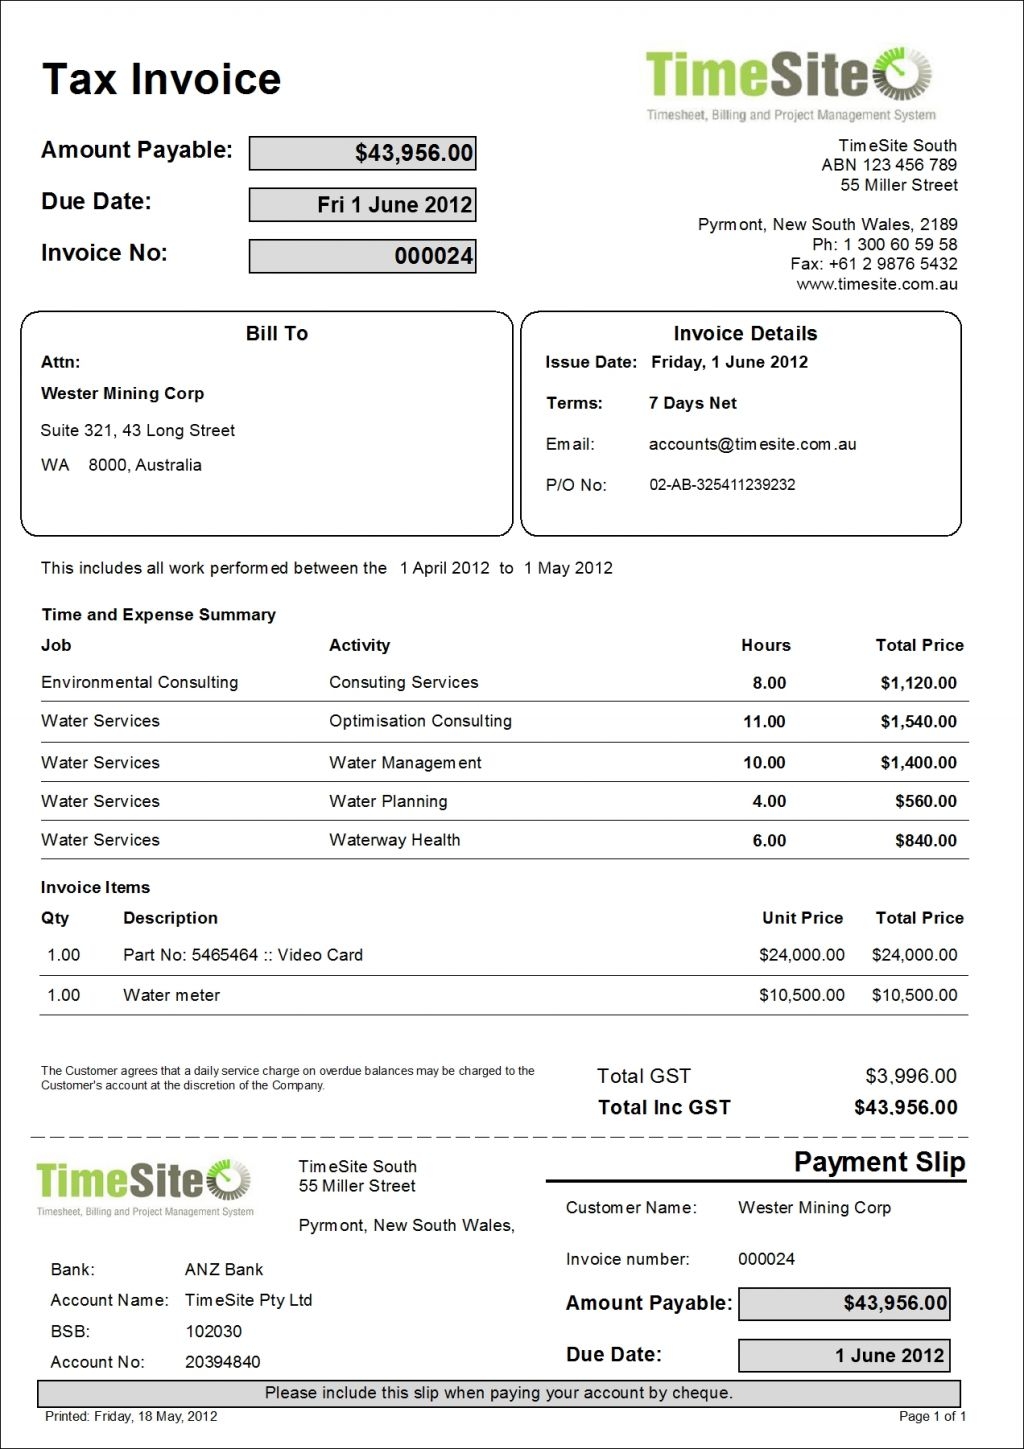 tax invoice example businessinvoicetemplatexyz example of tax invoice